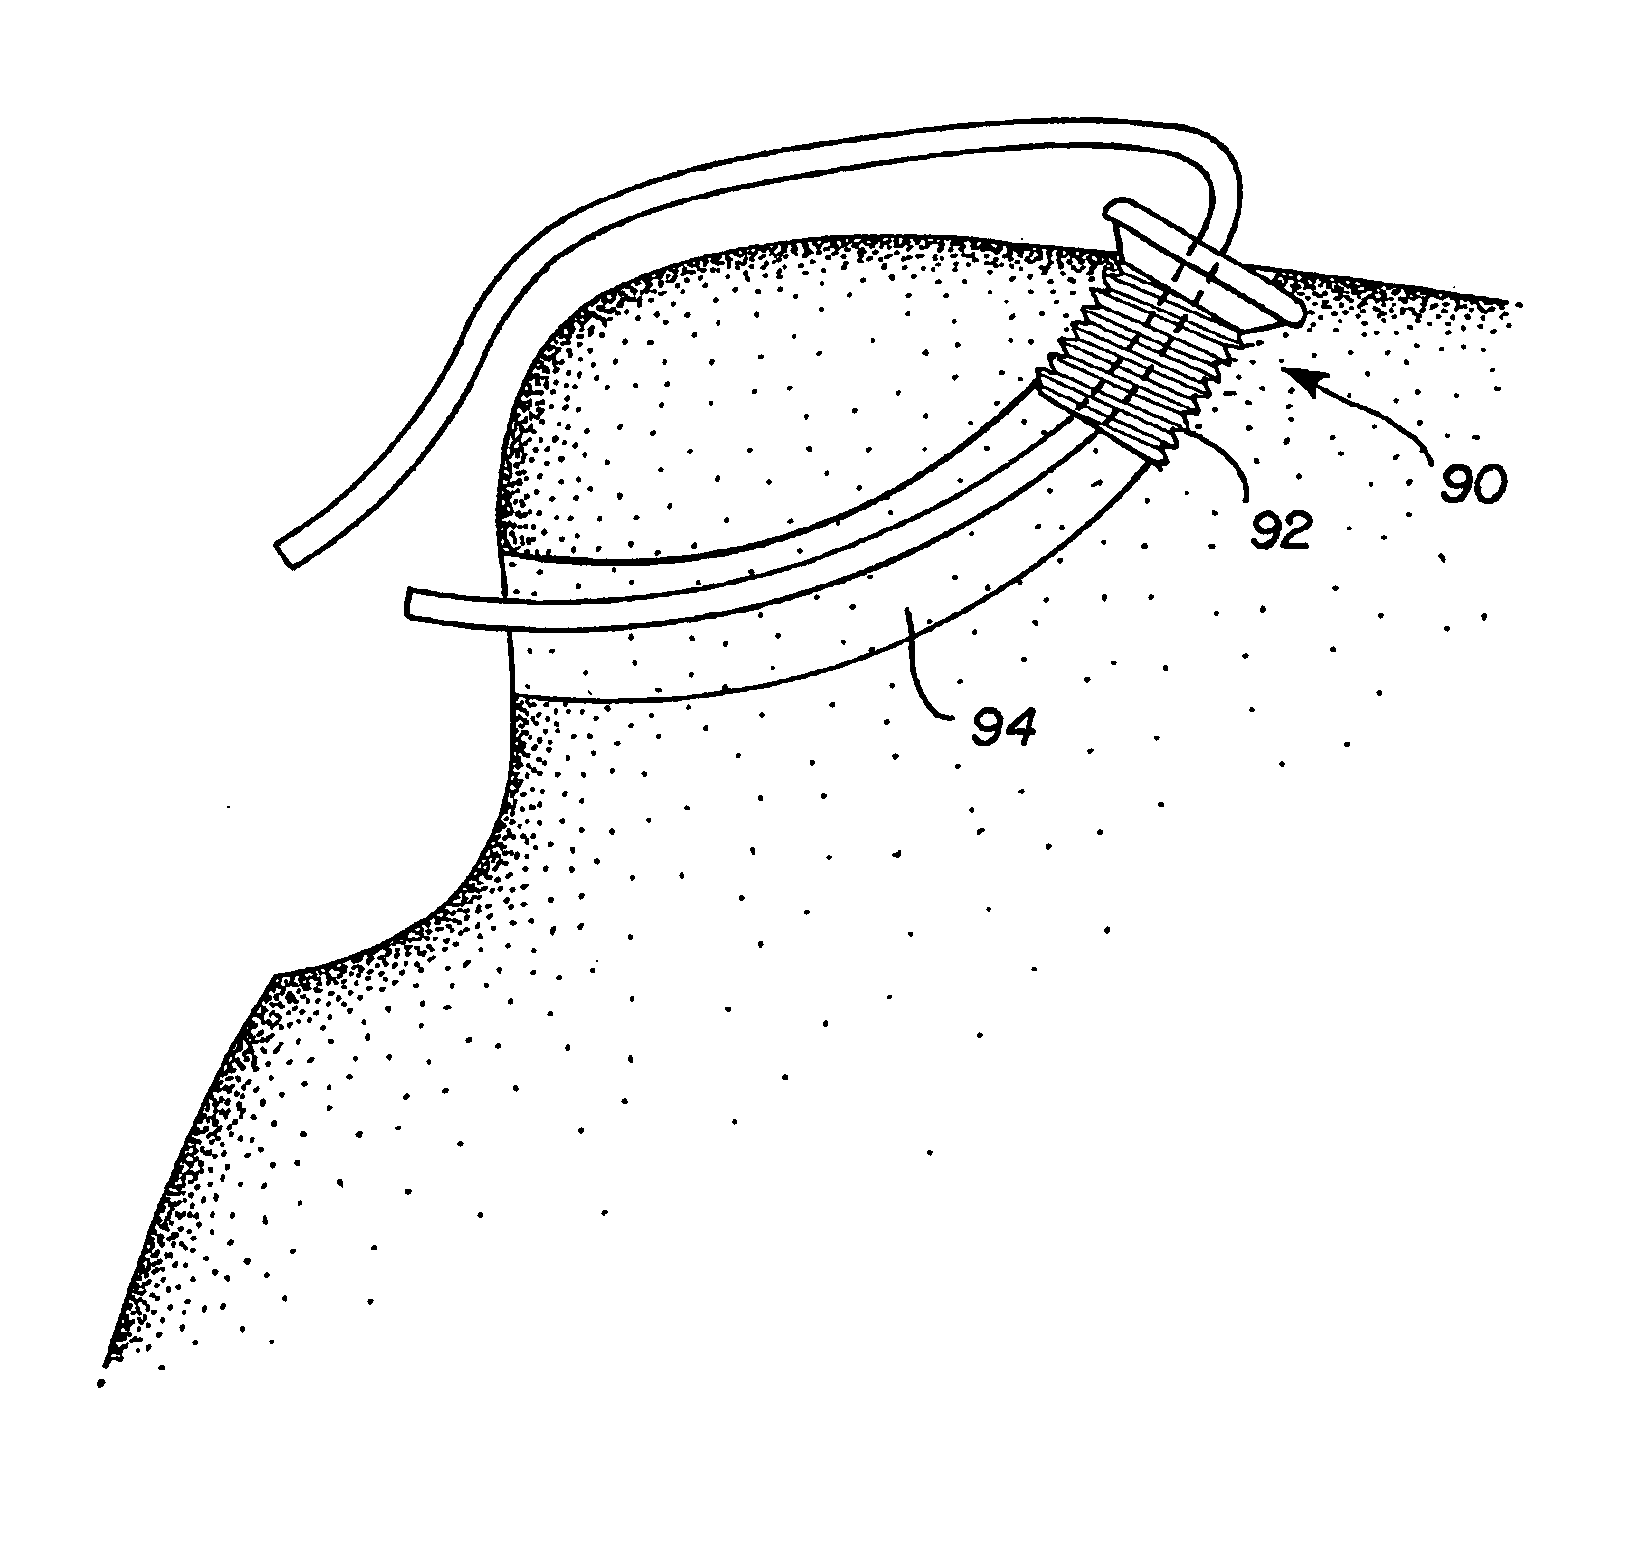 Methods and apparatus for preventing migration of sutures through transosseous tunnels